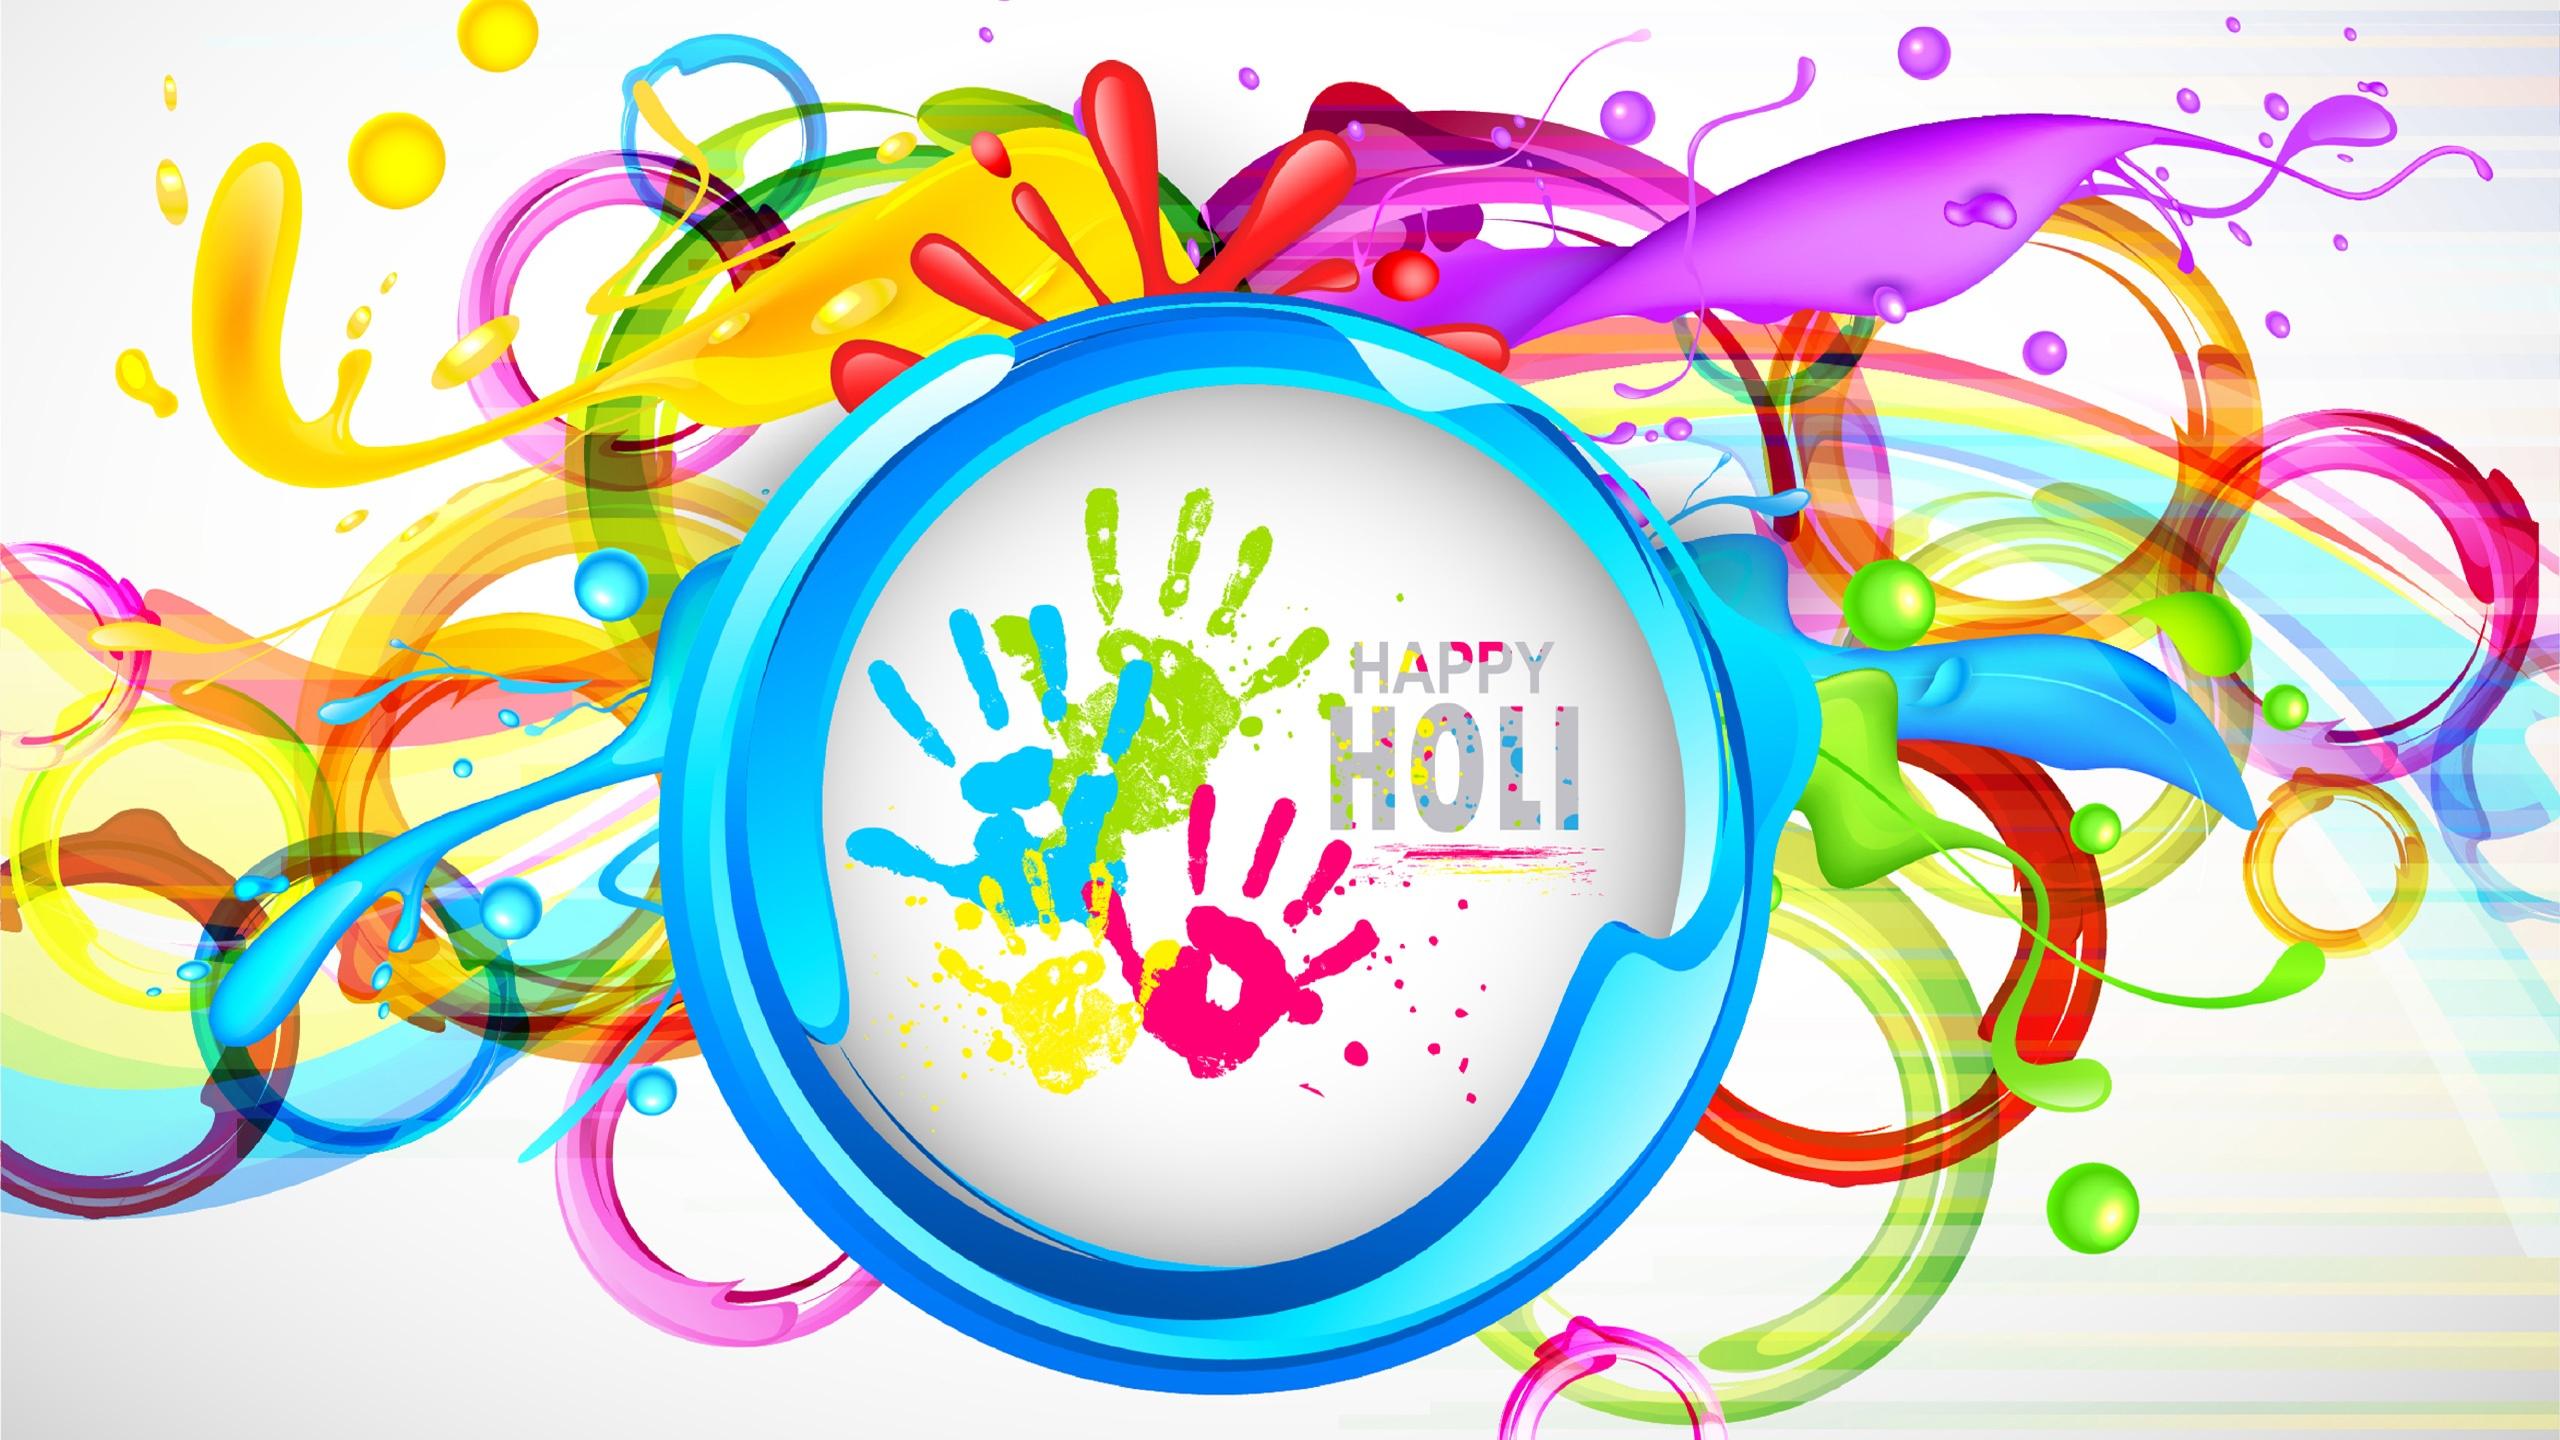 Happy Holi 2016 Wallpaper in jpg format for free download